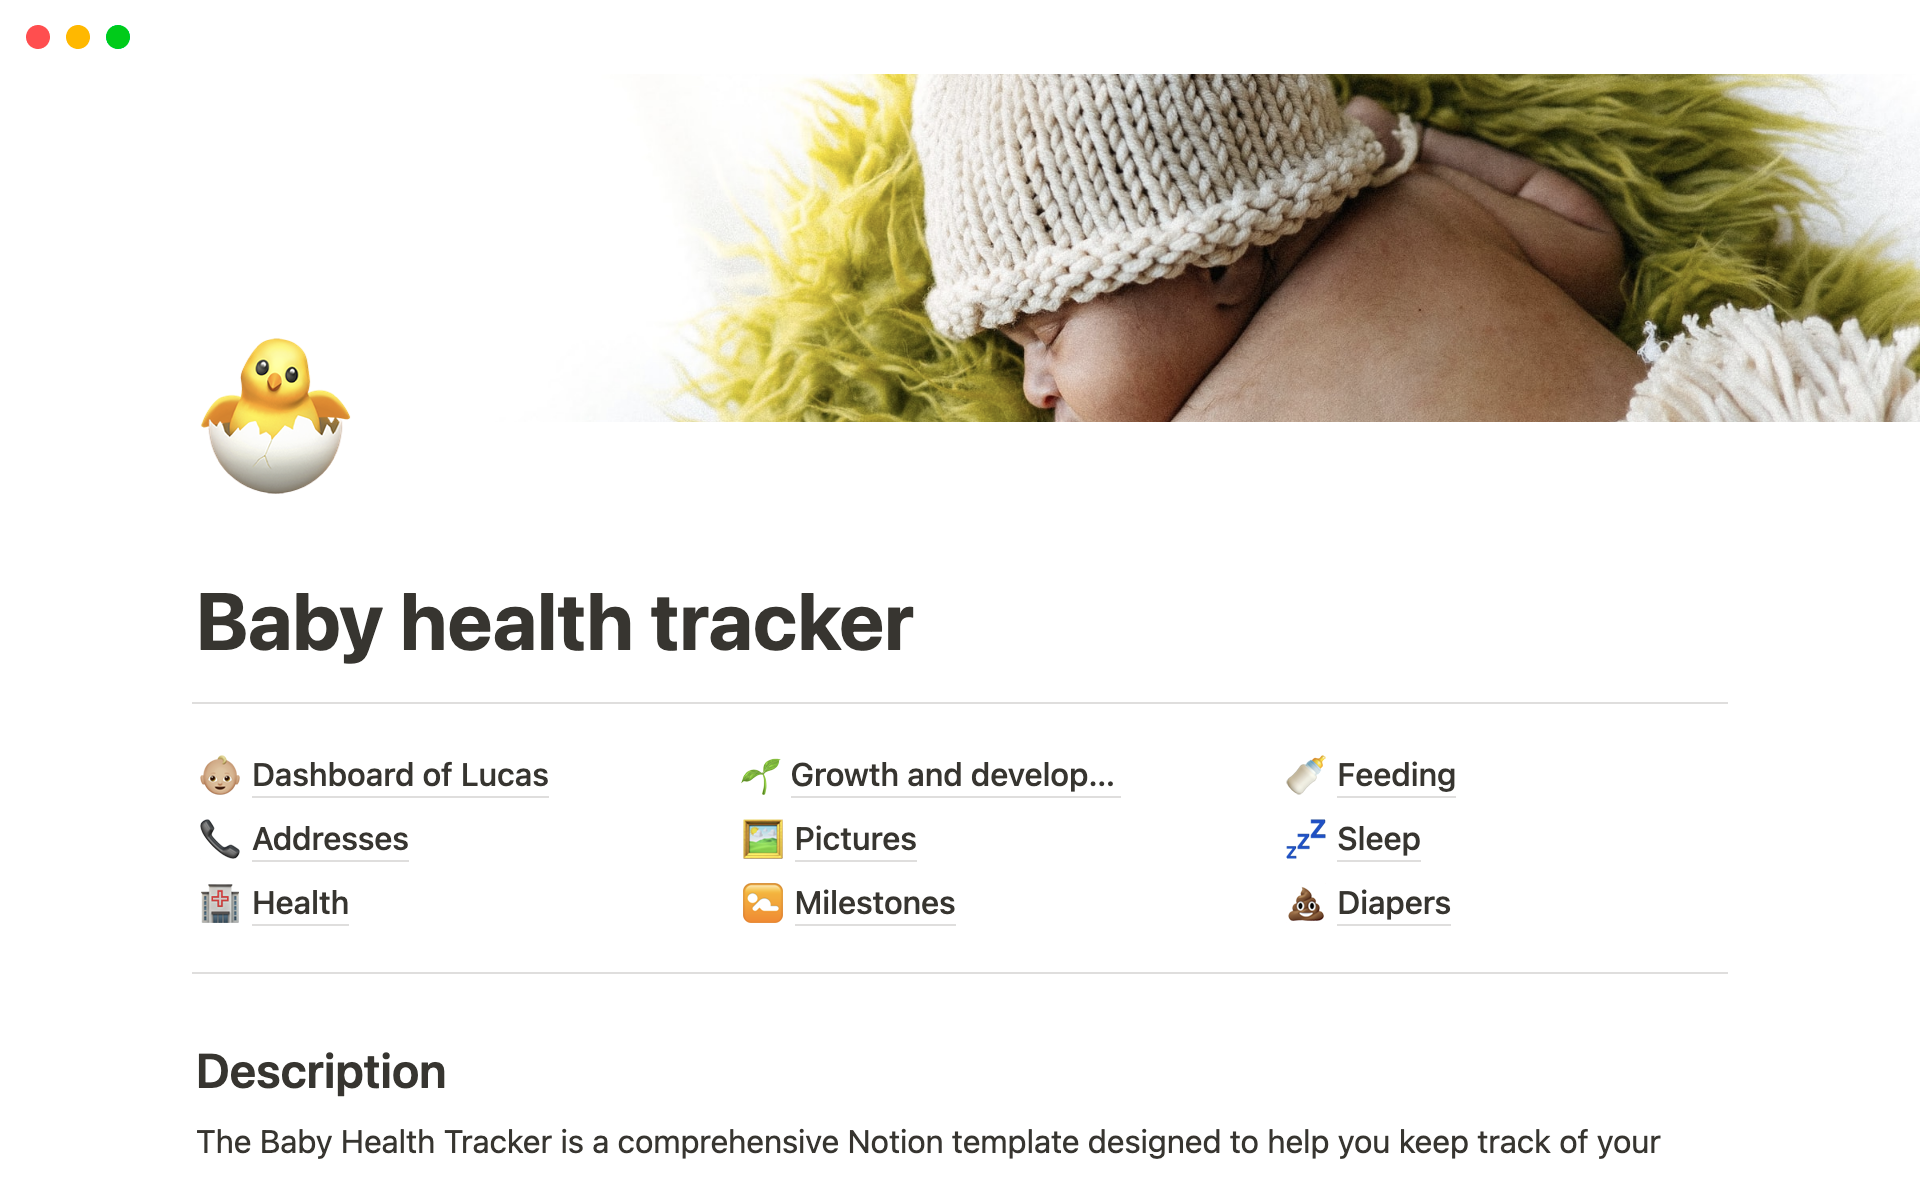 Keep Your Little One Healthy and Happy with the Baby Health Tracker Notion Template